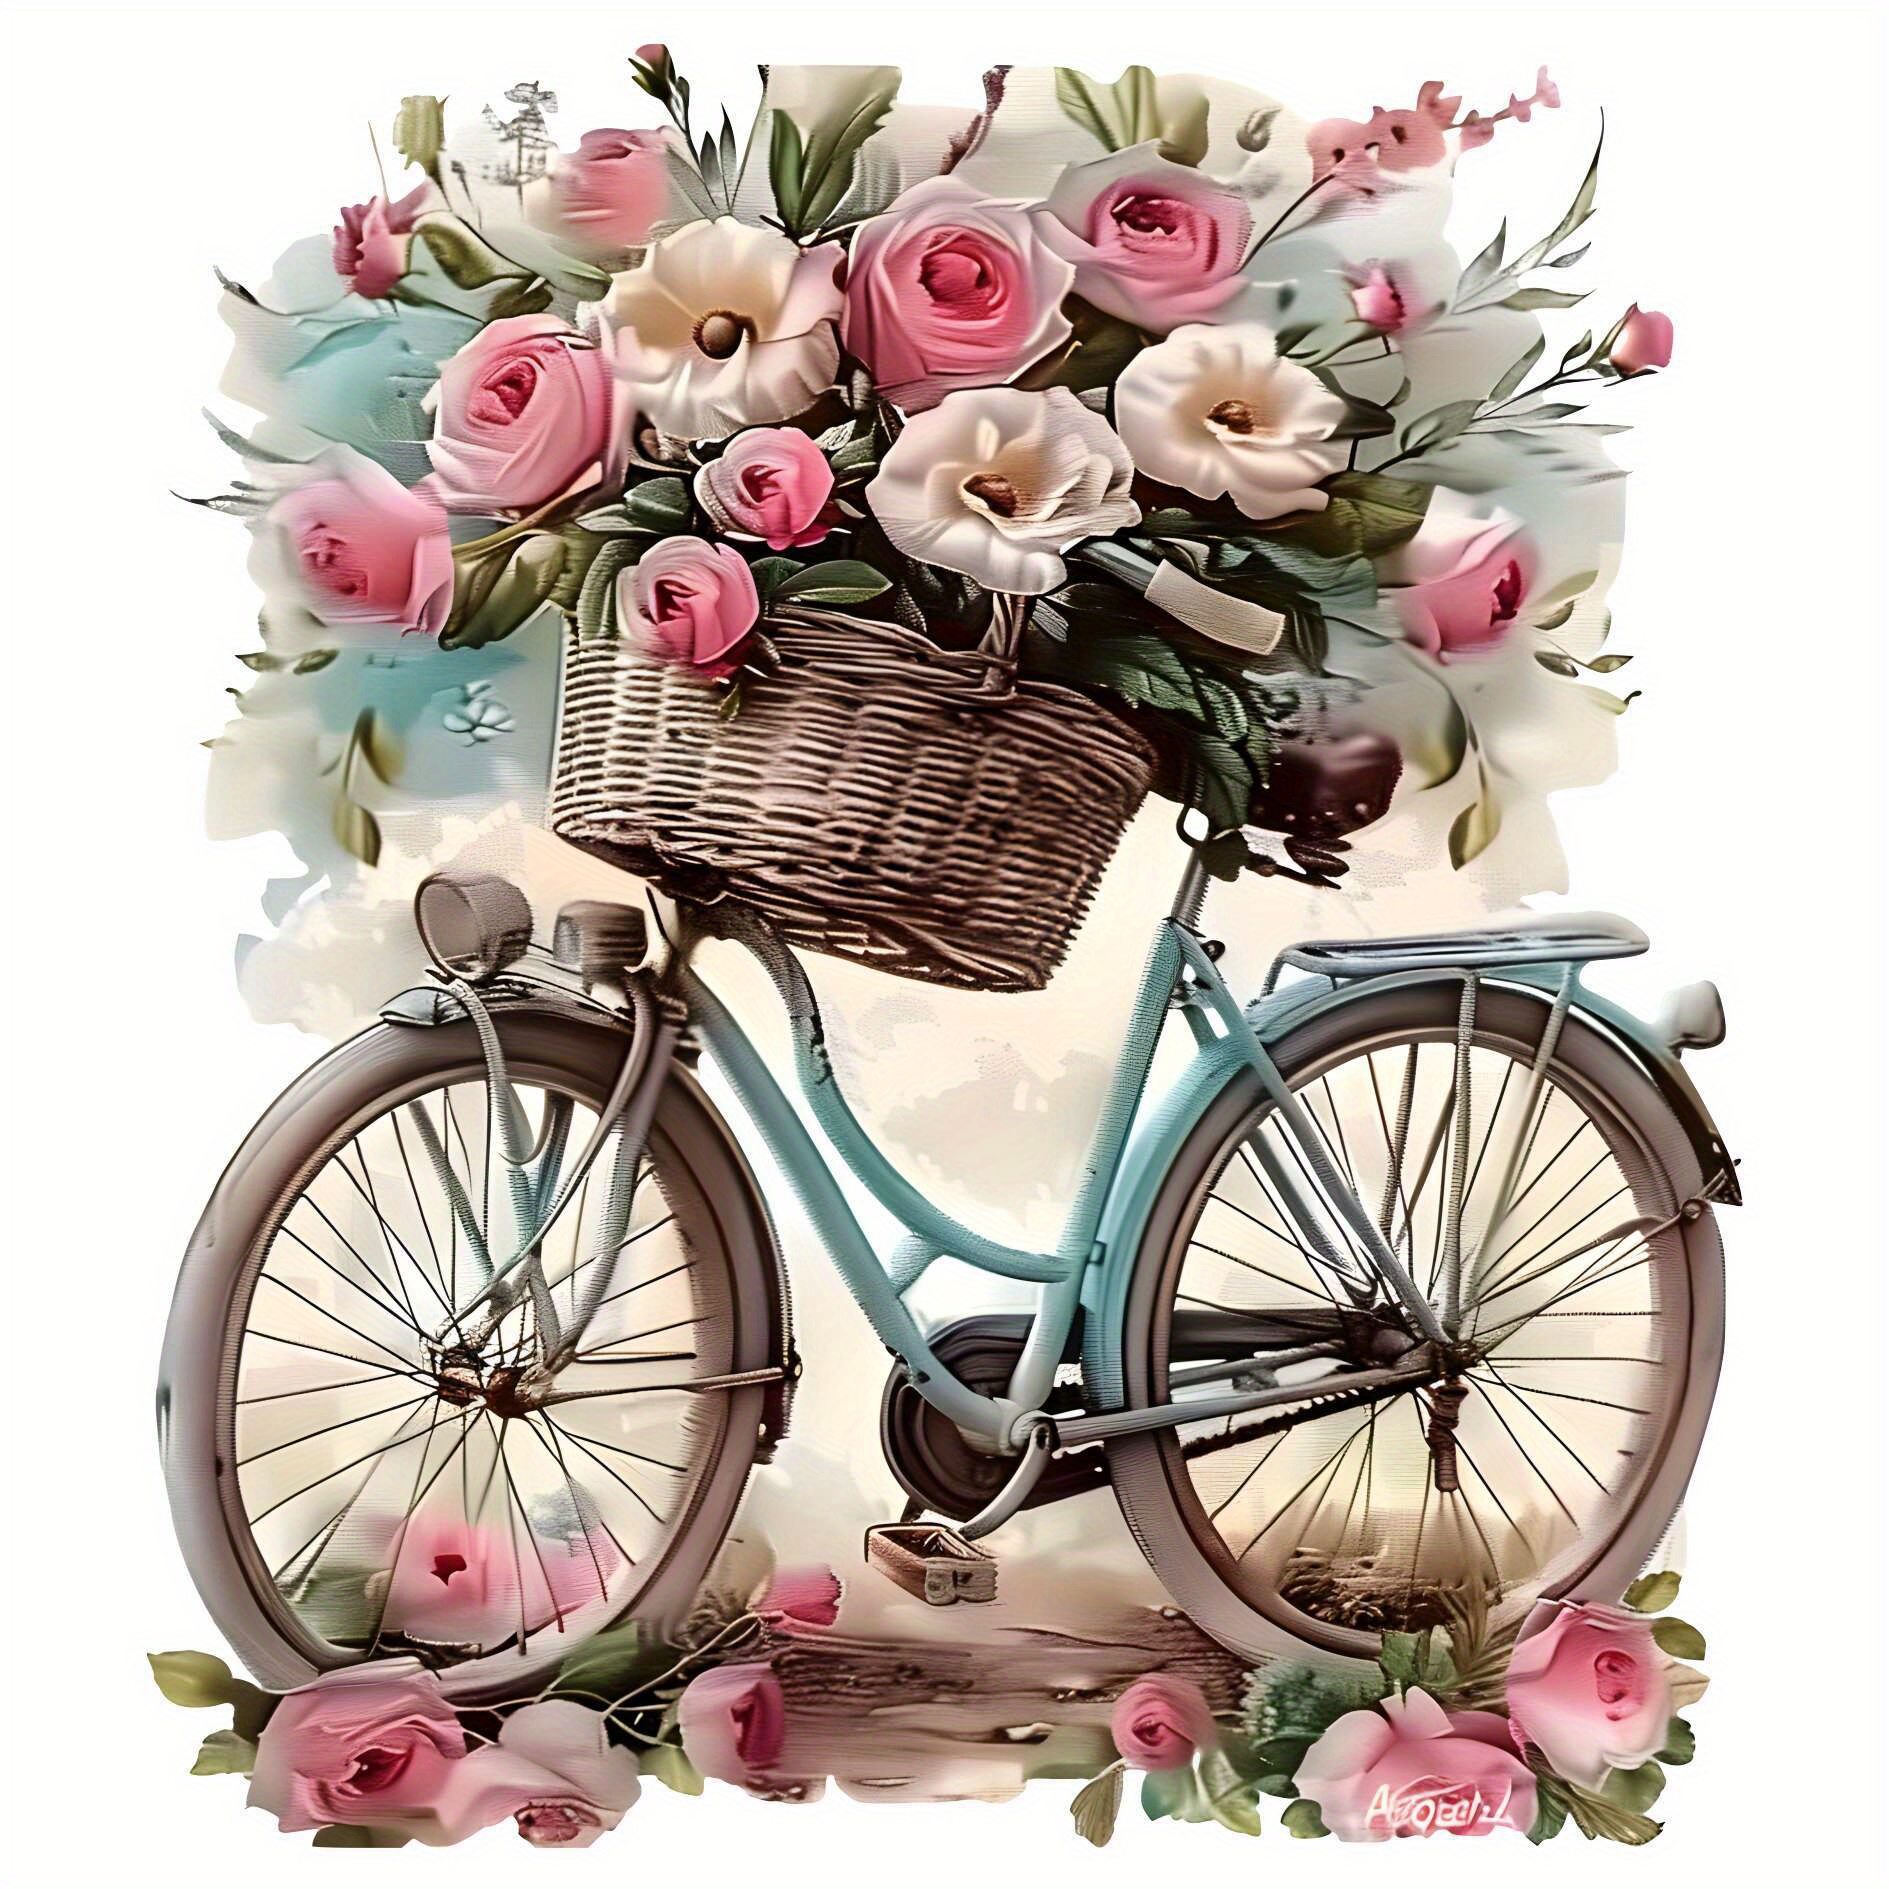 

1pc/2pcs/3pcs Shabby Chic Pastel Style Bike Stickers For T-shirts, Jeans, Pillows, Jackets